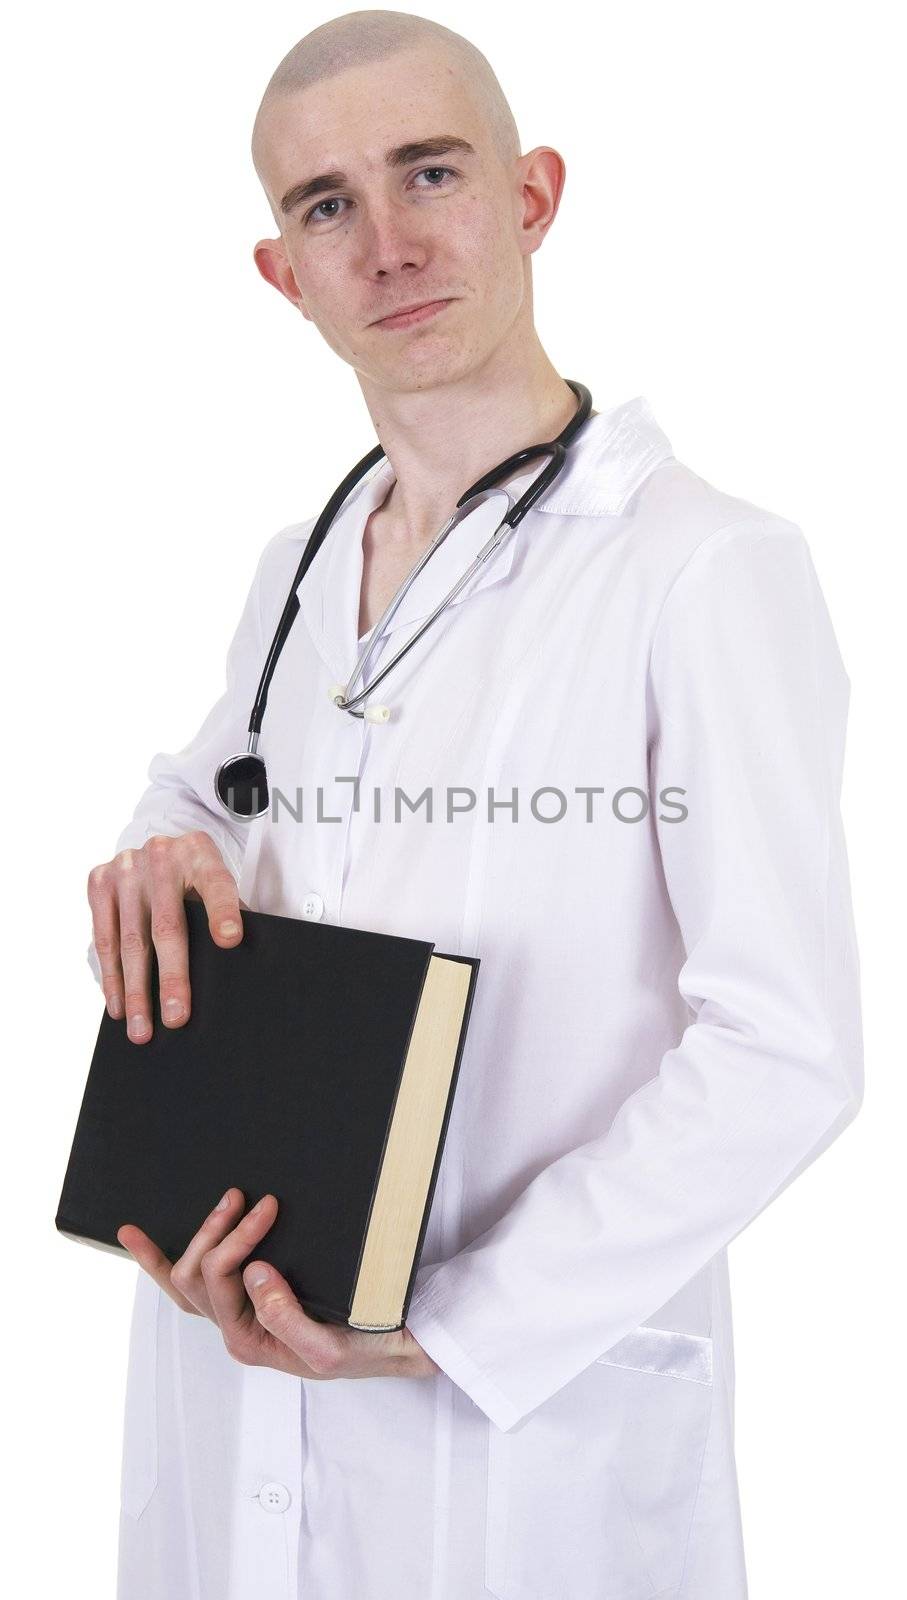 Doctor with a book and stetoscope by pzaxe